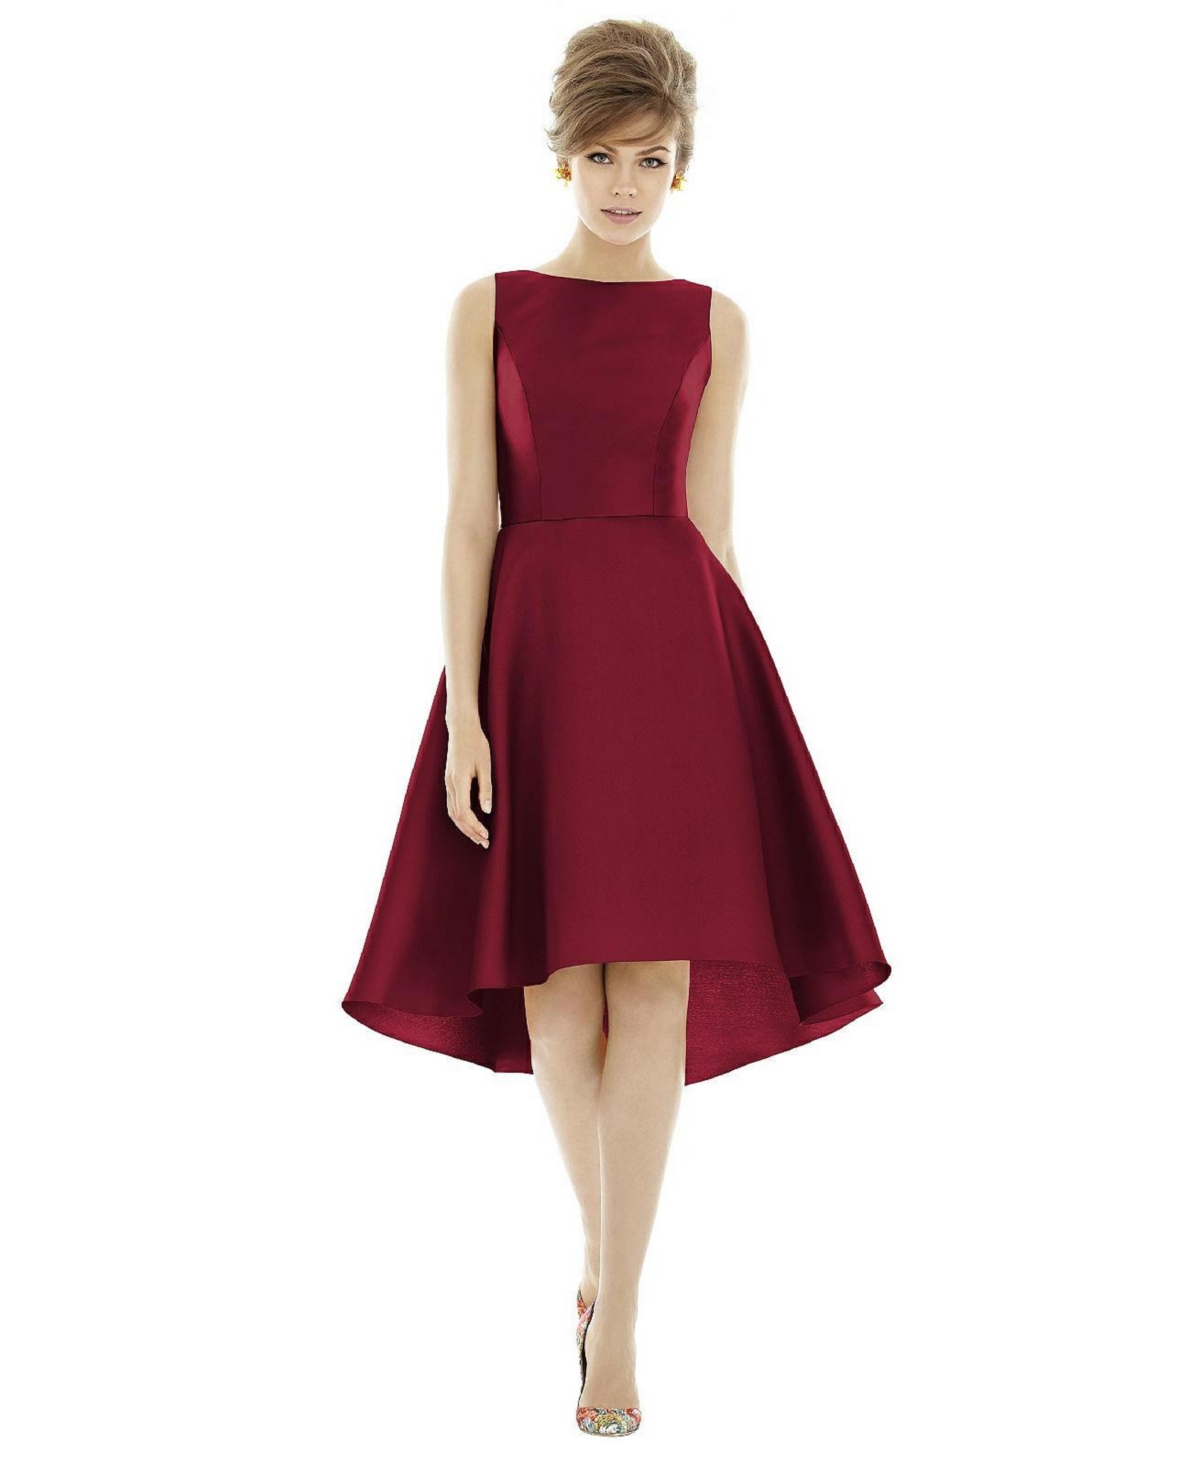 ALFRED SUNG BATEAU NECK SATIN HIGH LOW COCKTAIL DRESS